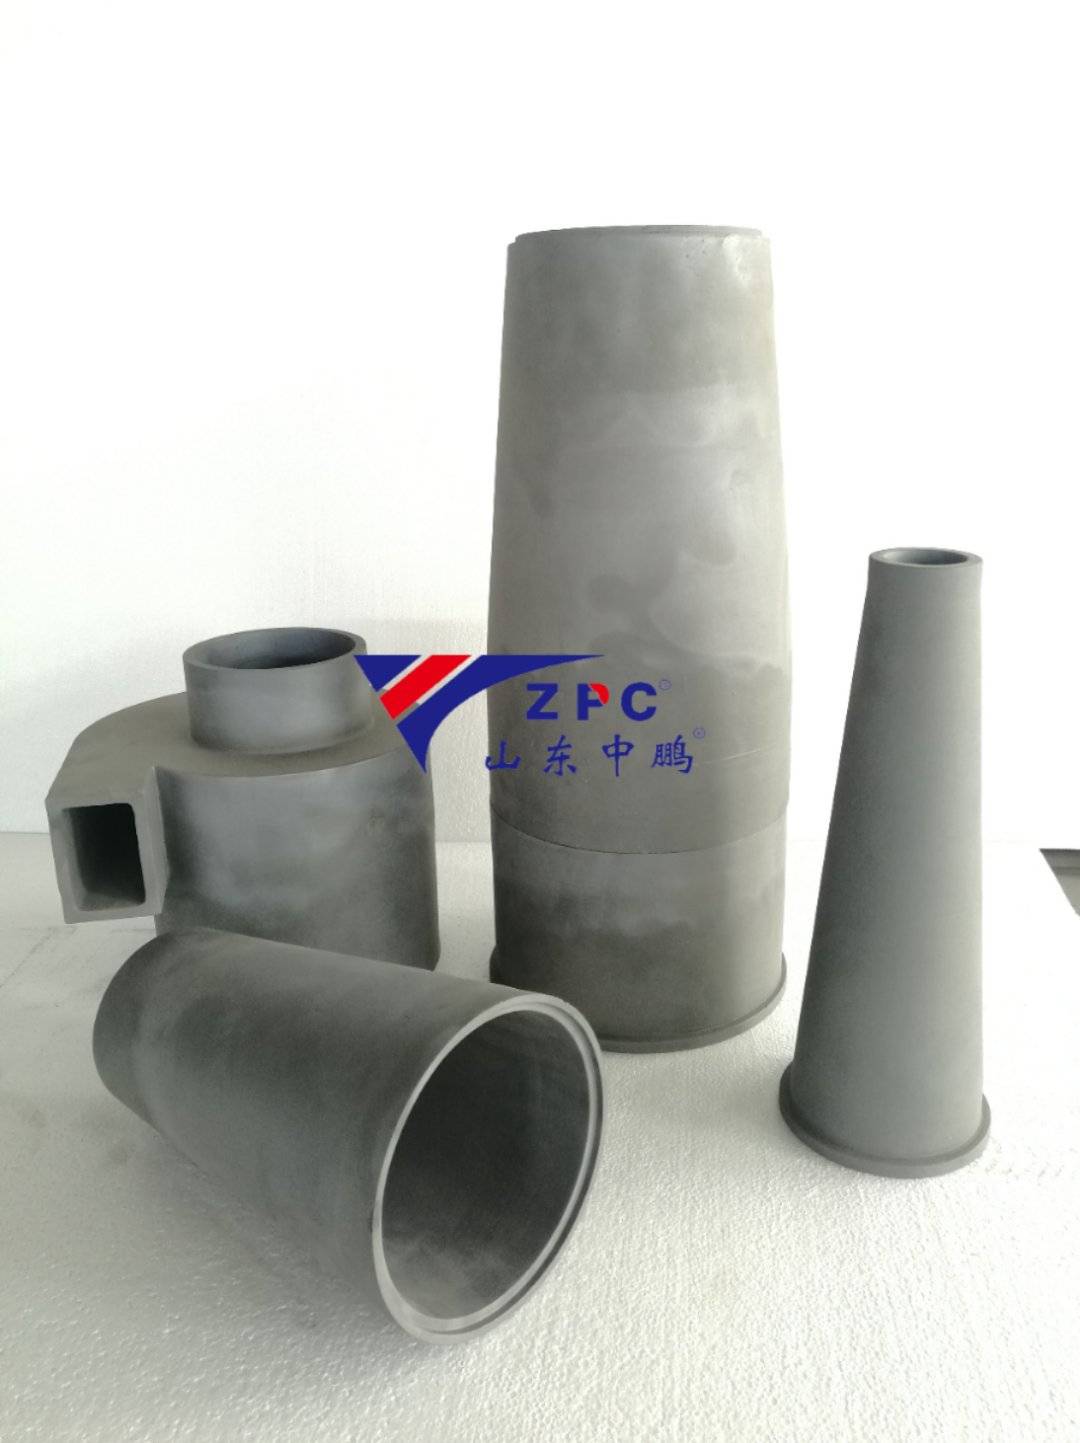 Factory Price For Plasma Machine Cnc Plasma Cutter -
  Silicon carbide parts and insert  – ZhongPeng